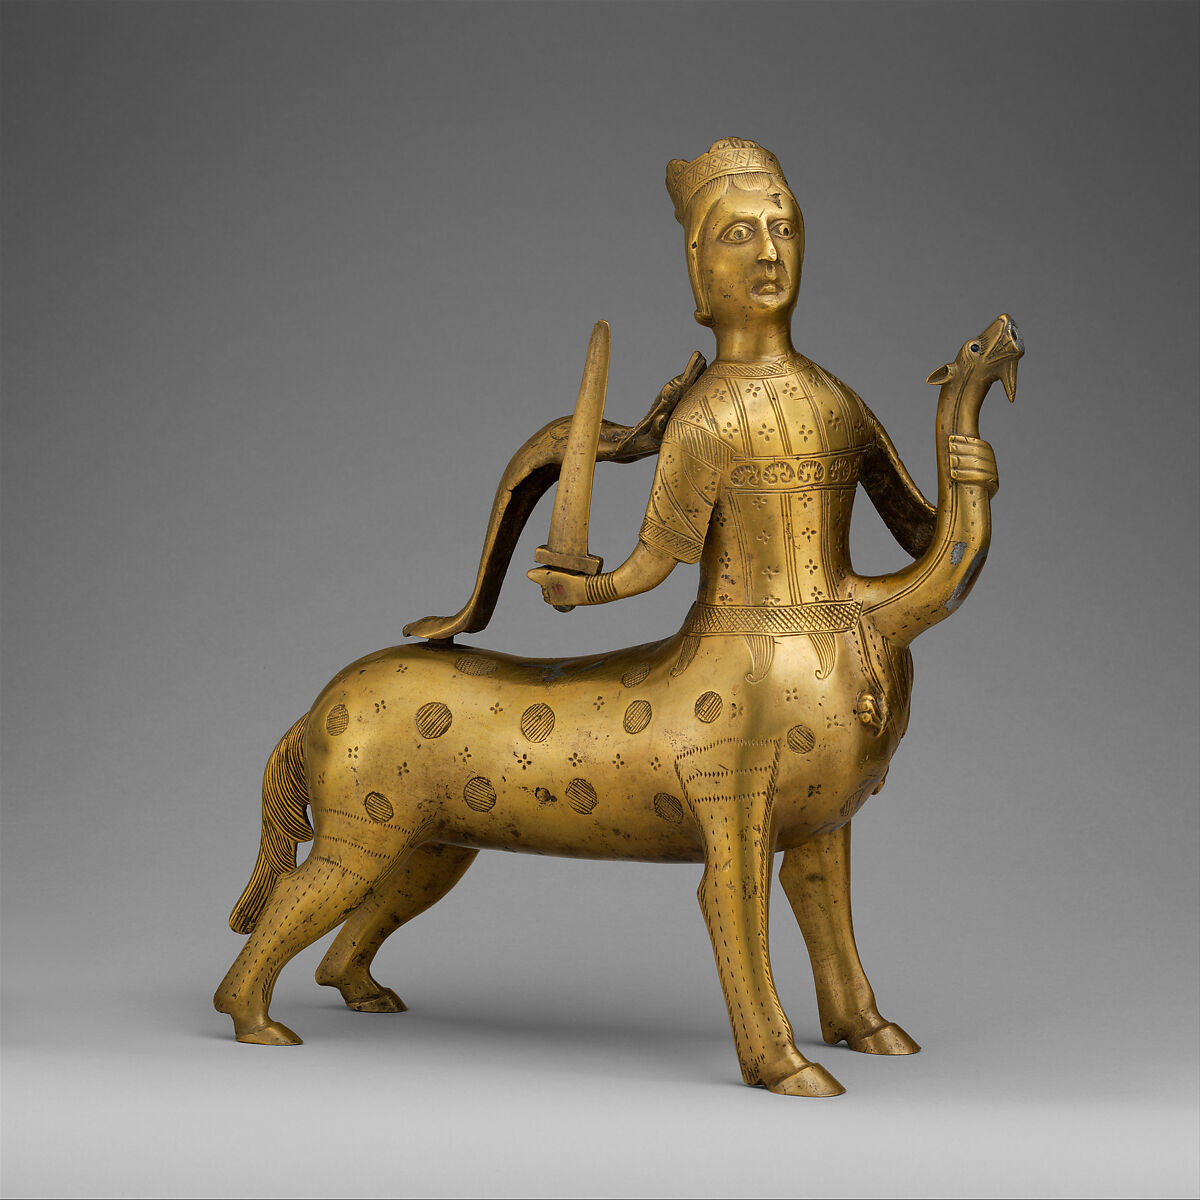 Aquamanile in the Form of a Crowned Centaur Fighting a Dragon, Copper alloy, German 